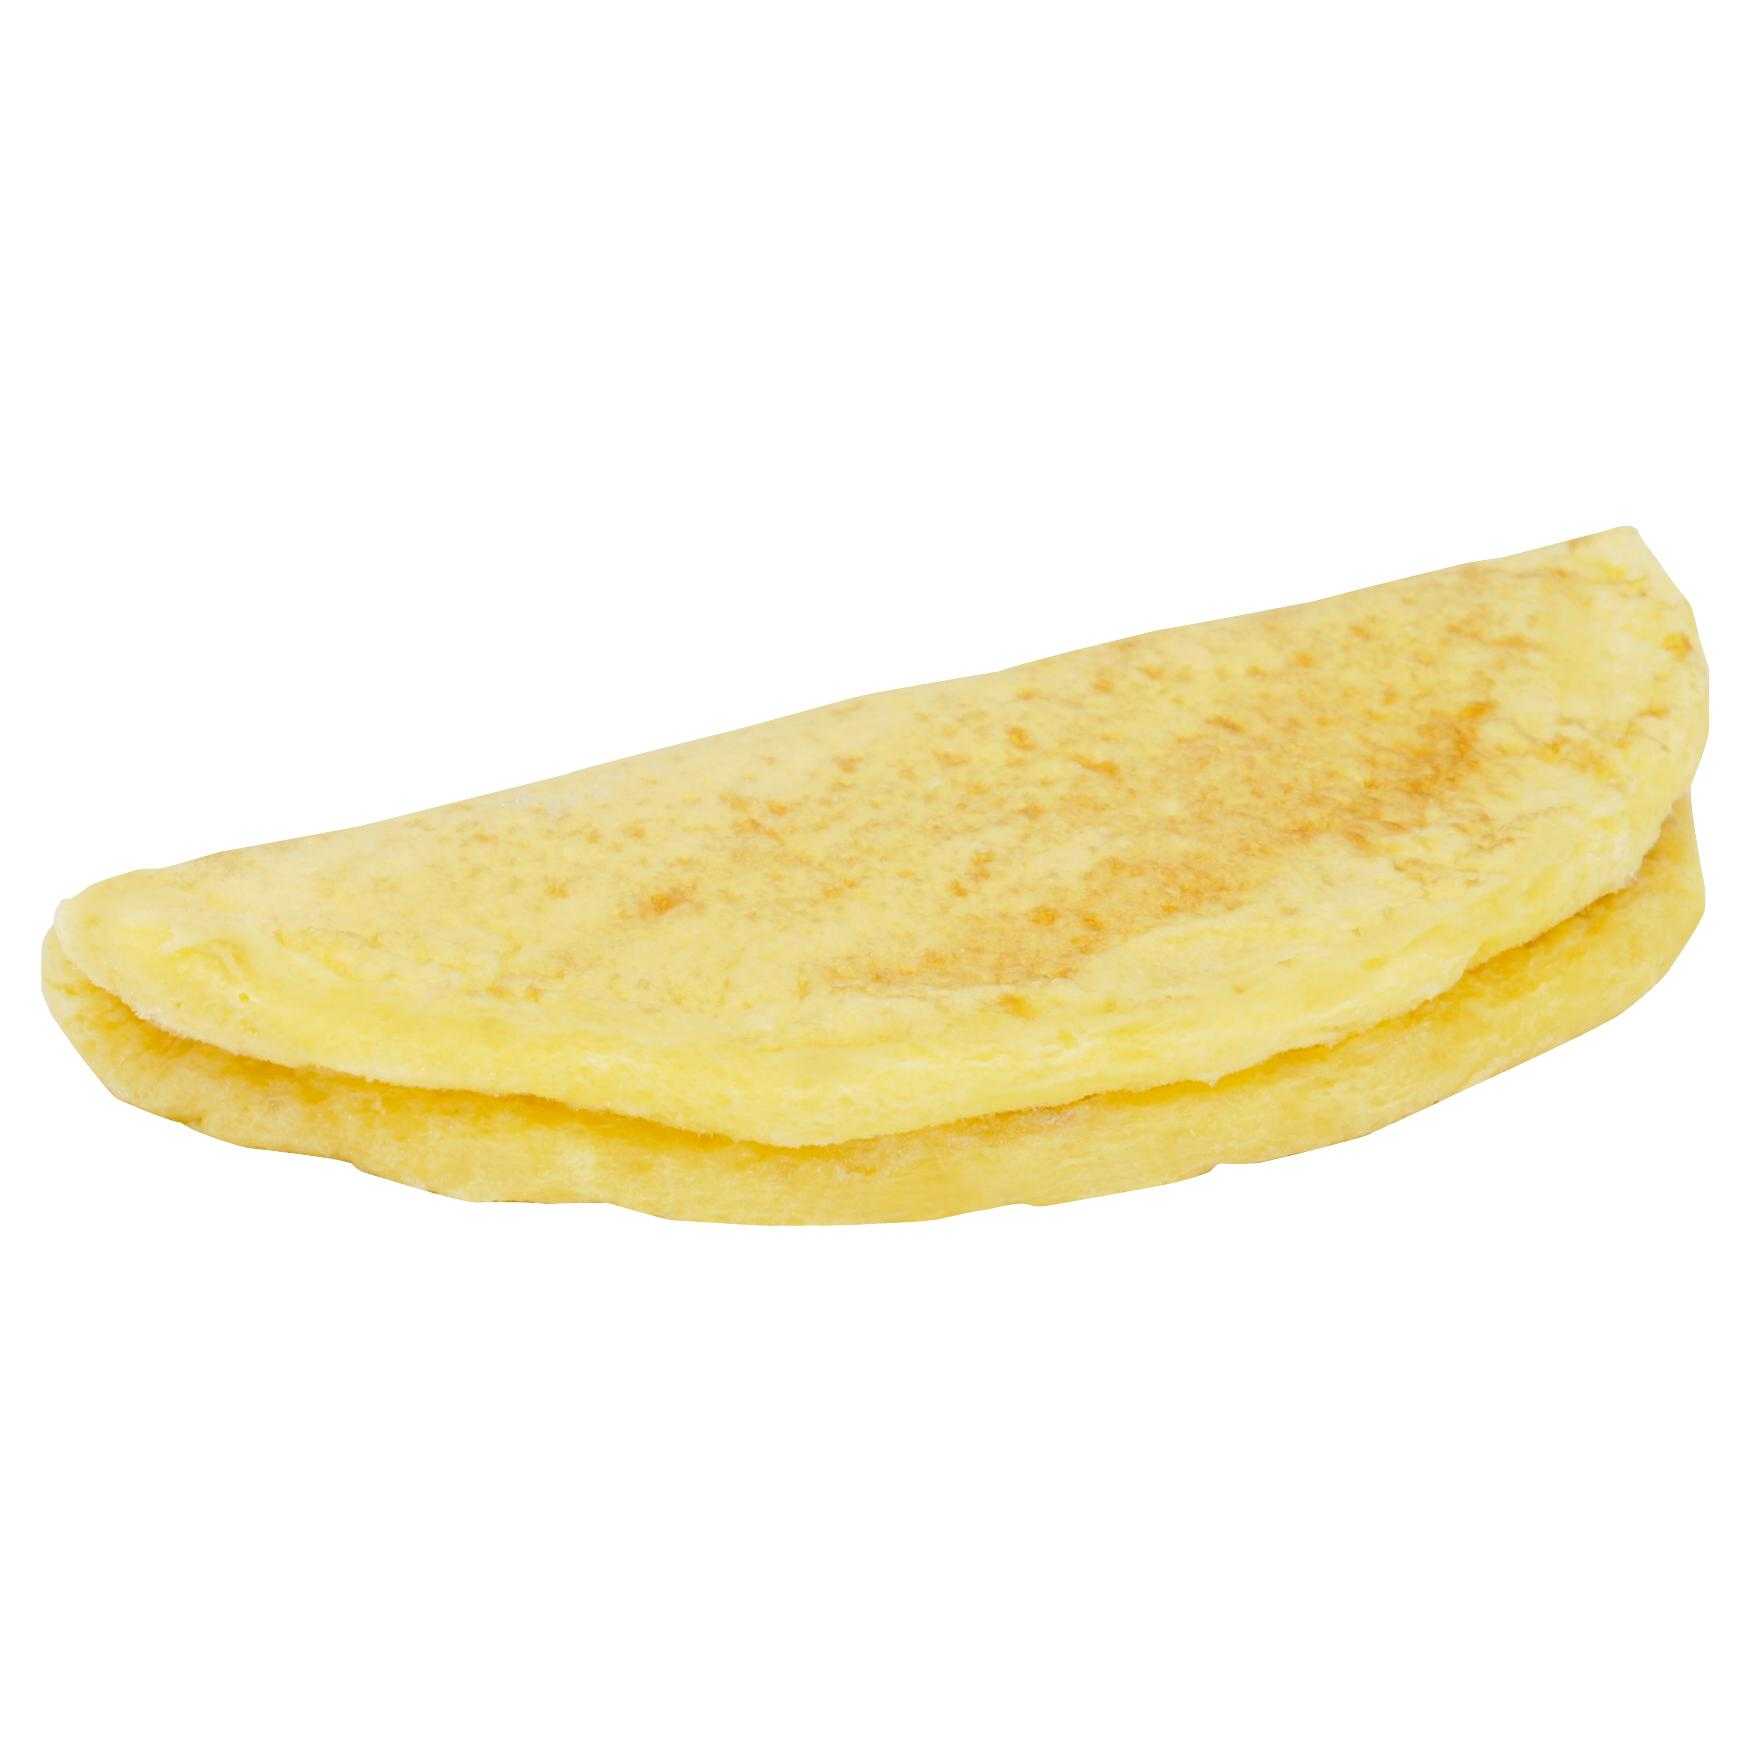 Papetti’s® Fully-Cooked 5″ x 2.25″ Singlefold Omelet filled with Cheddar Cheese, CN, 175/2.0 oz